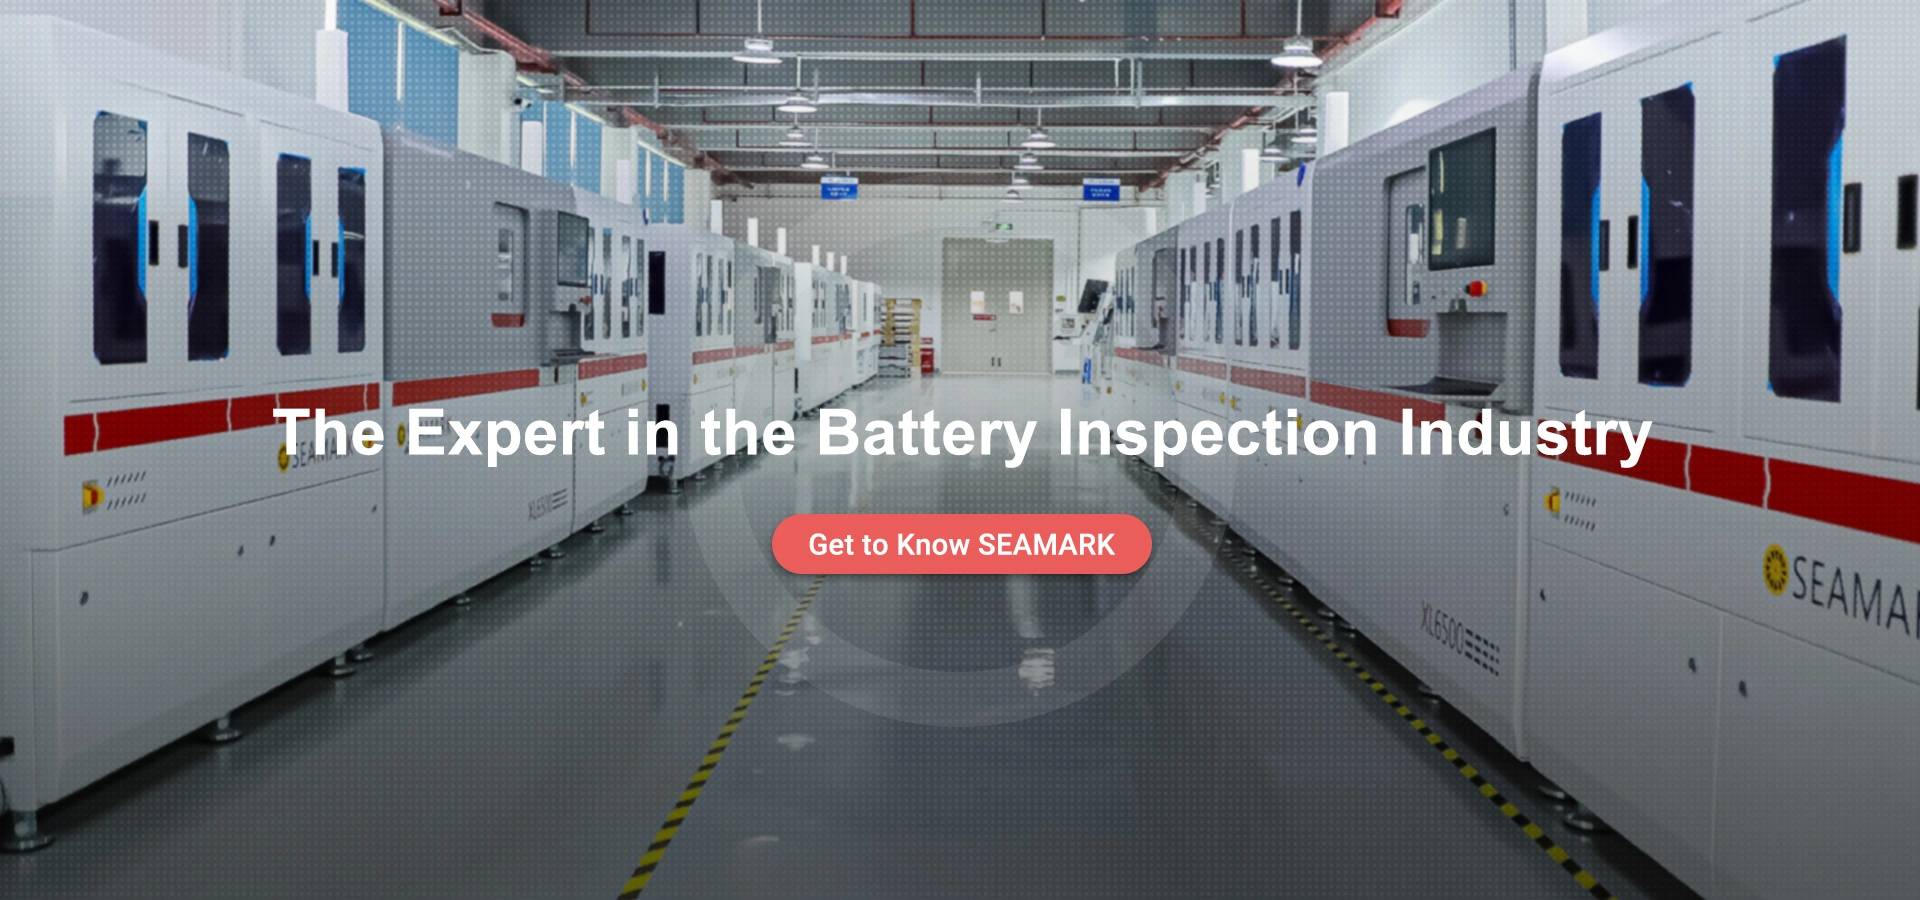 The Expert in the Battery X-ray Inspection Industry